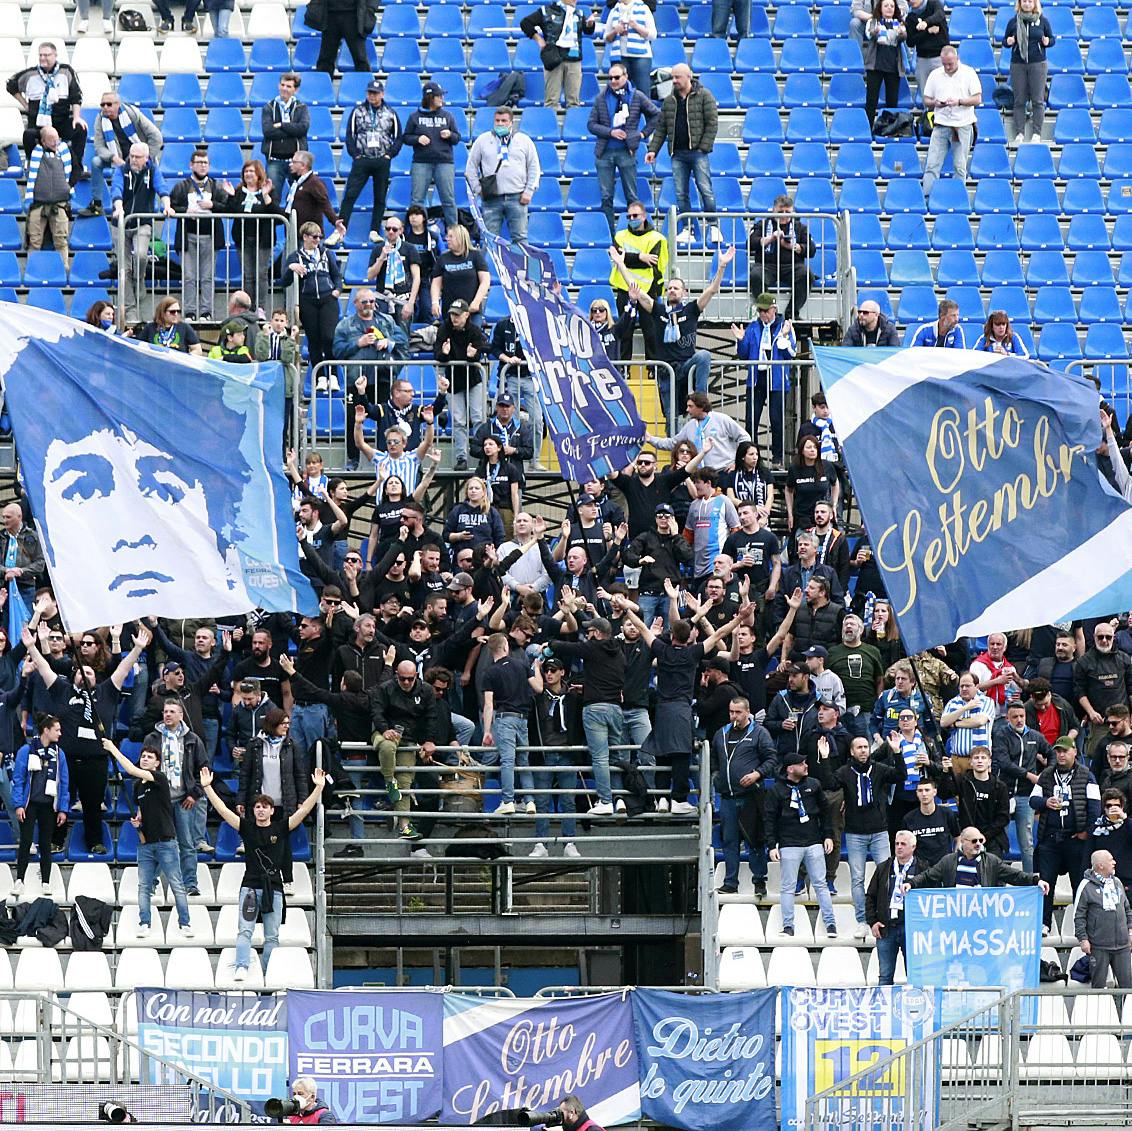 Brescia - SPAL, presale information for the guest sector